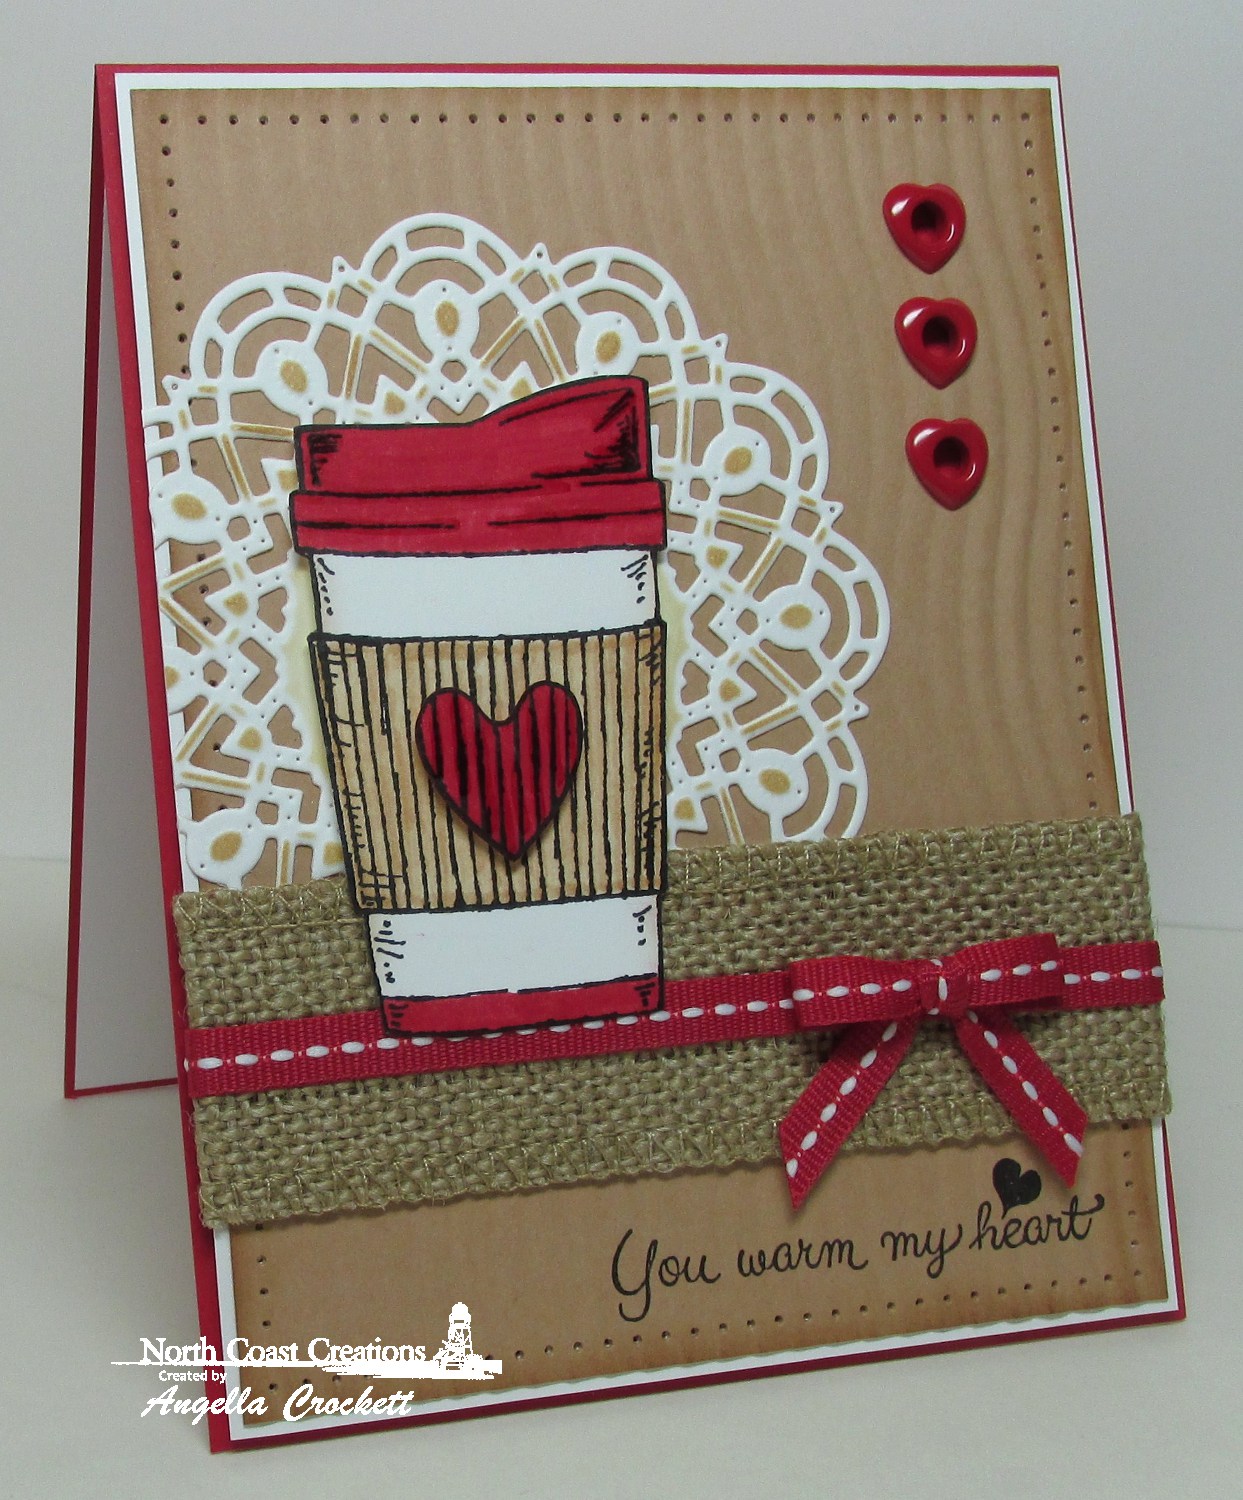 Stamps - North Coast Creations Warm My Heart, Our Daily Bread Designs Custom Doily Dies